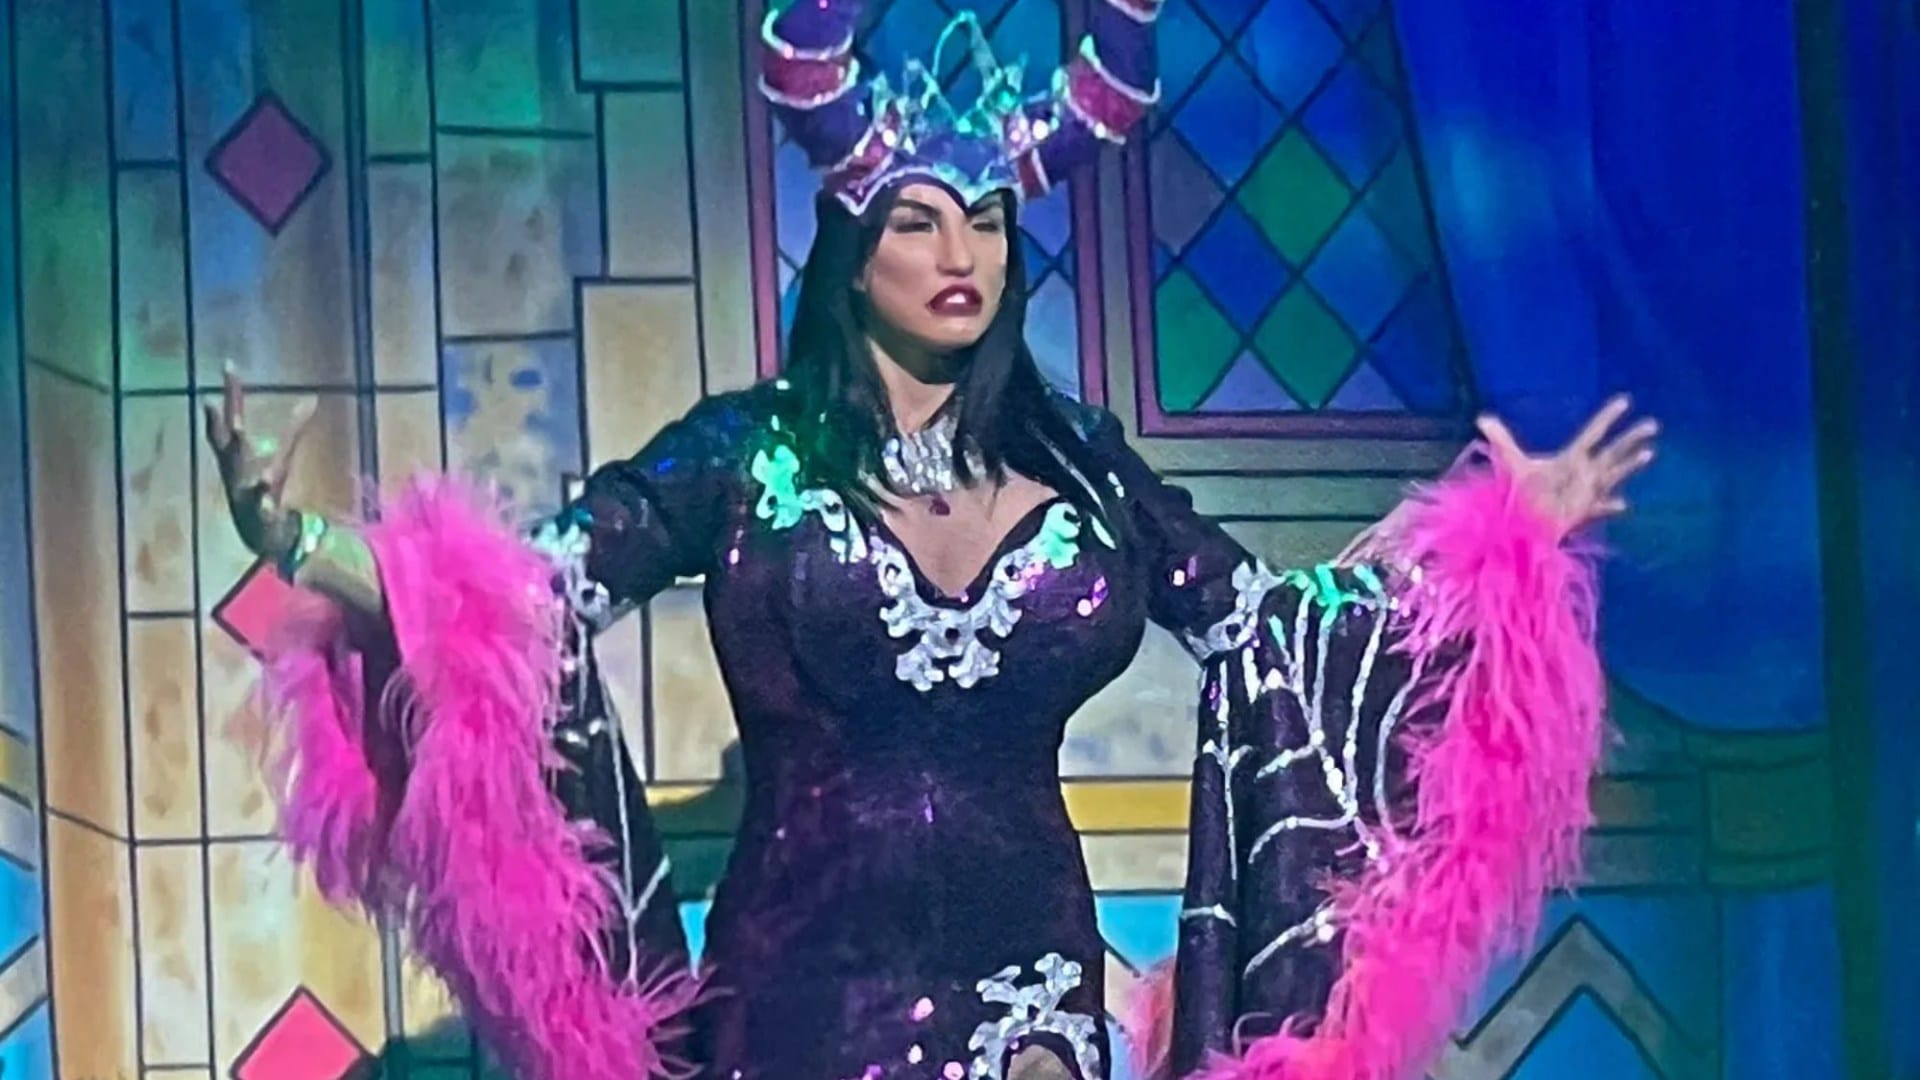 Katie Price panto slashes ticket prices days into show run after fans slammed ‘embarrassing’ performance